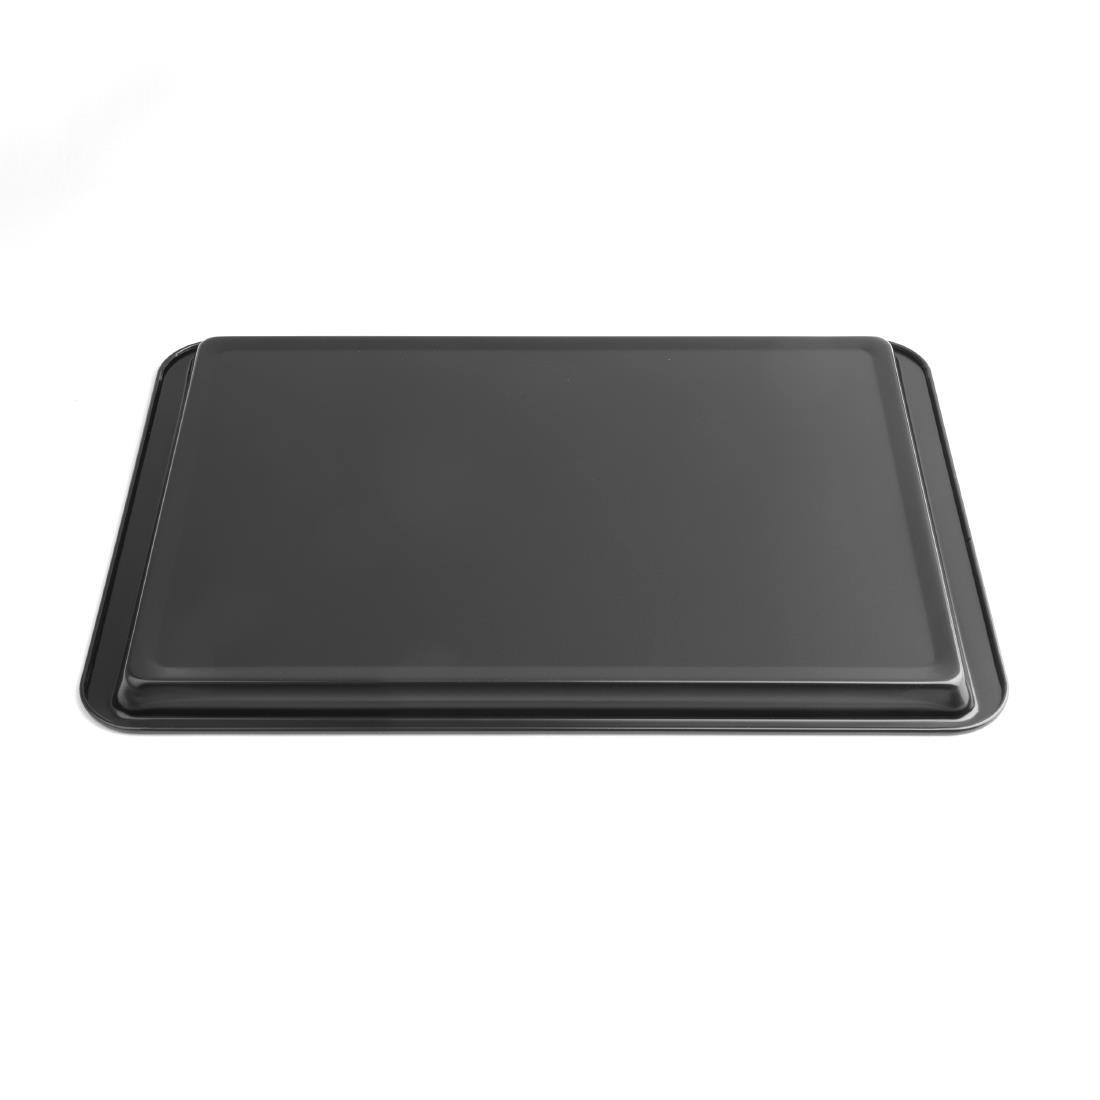 Vogue Non-Stick Carbon Steel Baking Tray 370 x 257mm - GD014  - 2